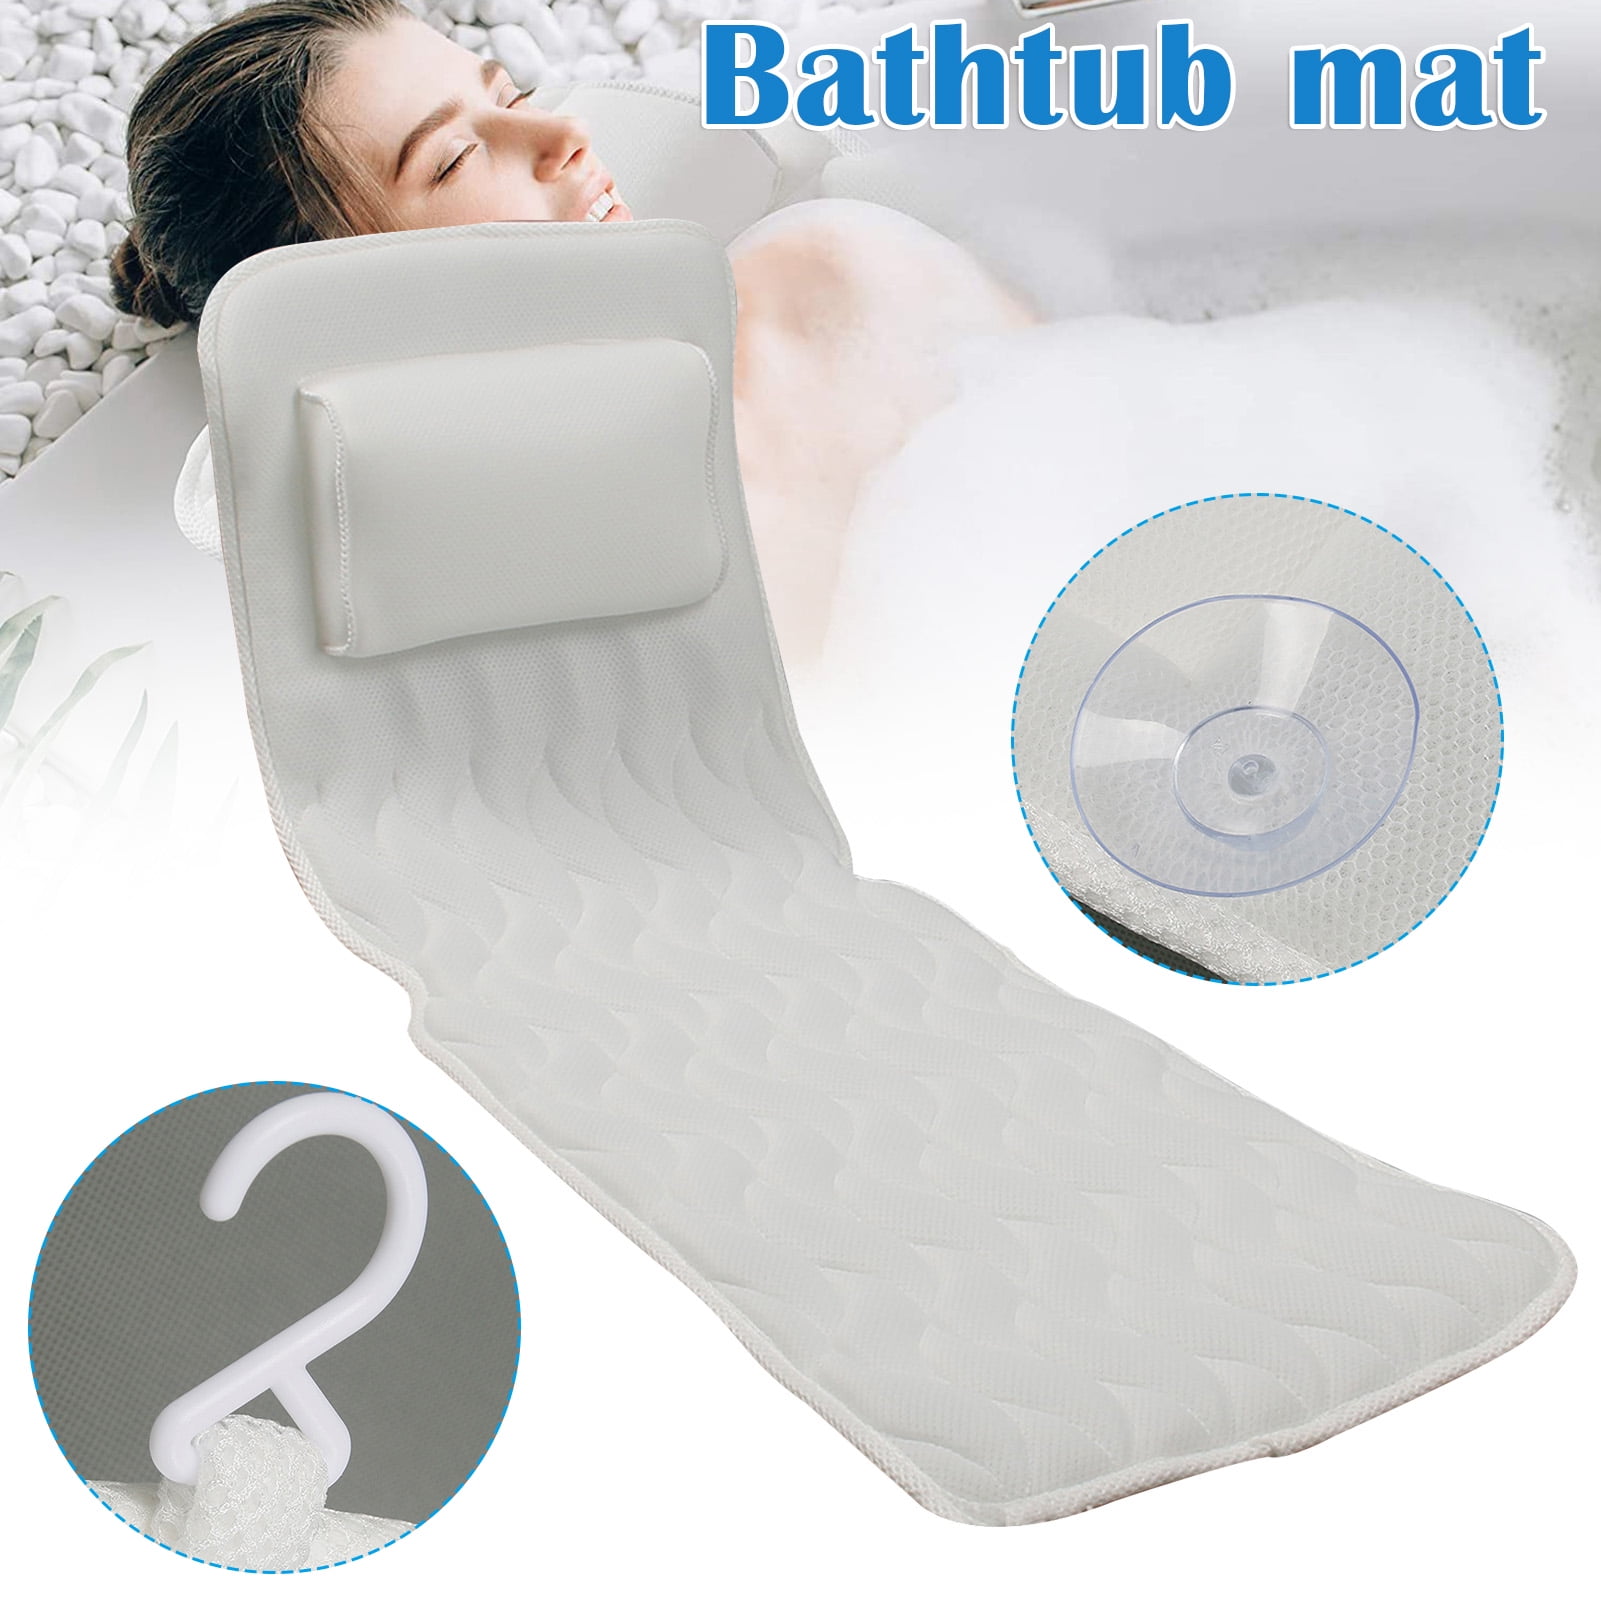 Bathtub Full Body Comfort Spa Pillow and Spa Cushion Mat Bath with Suction Cup 